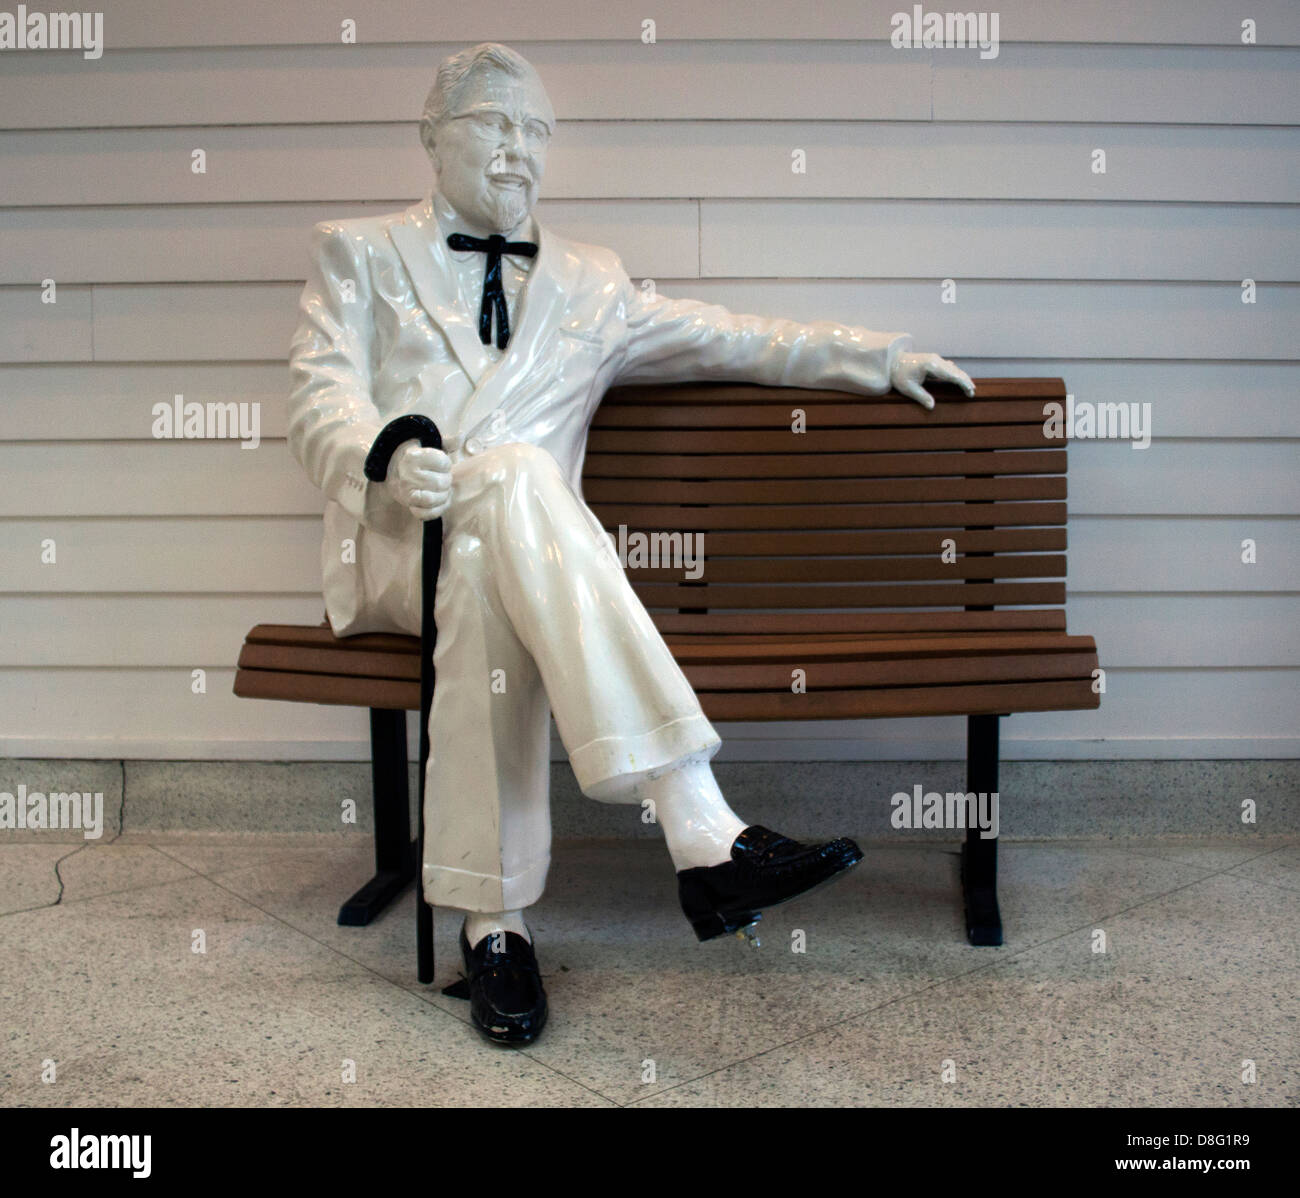 Colonel Sanders Stock Photos & Colonel Sanders Stock Images - Alamy